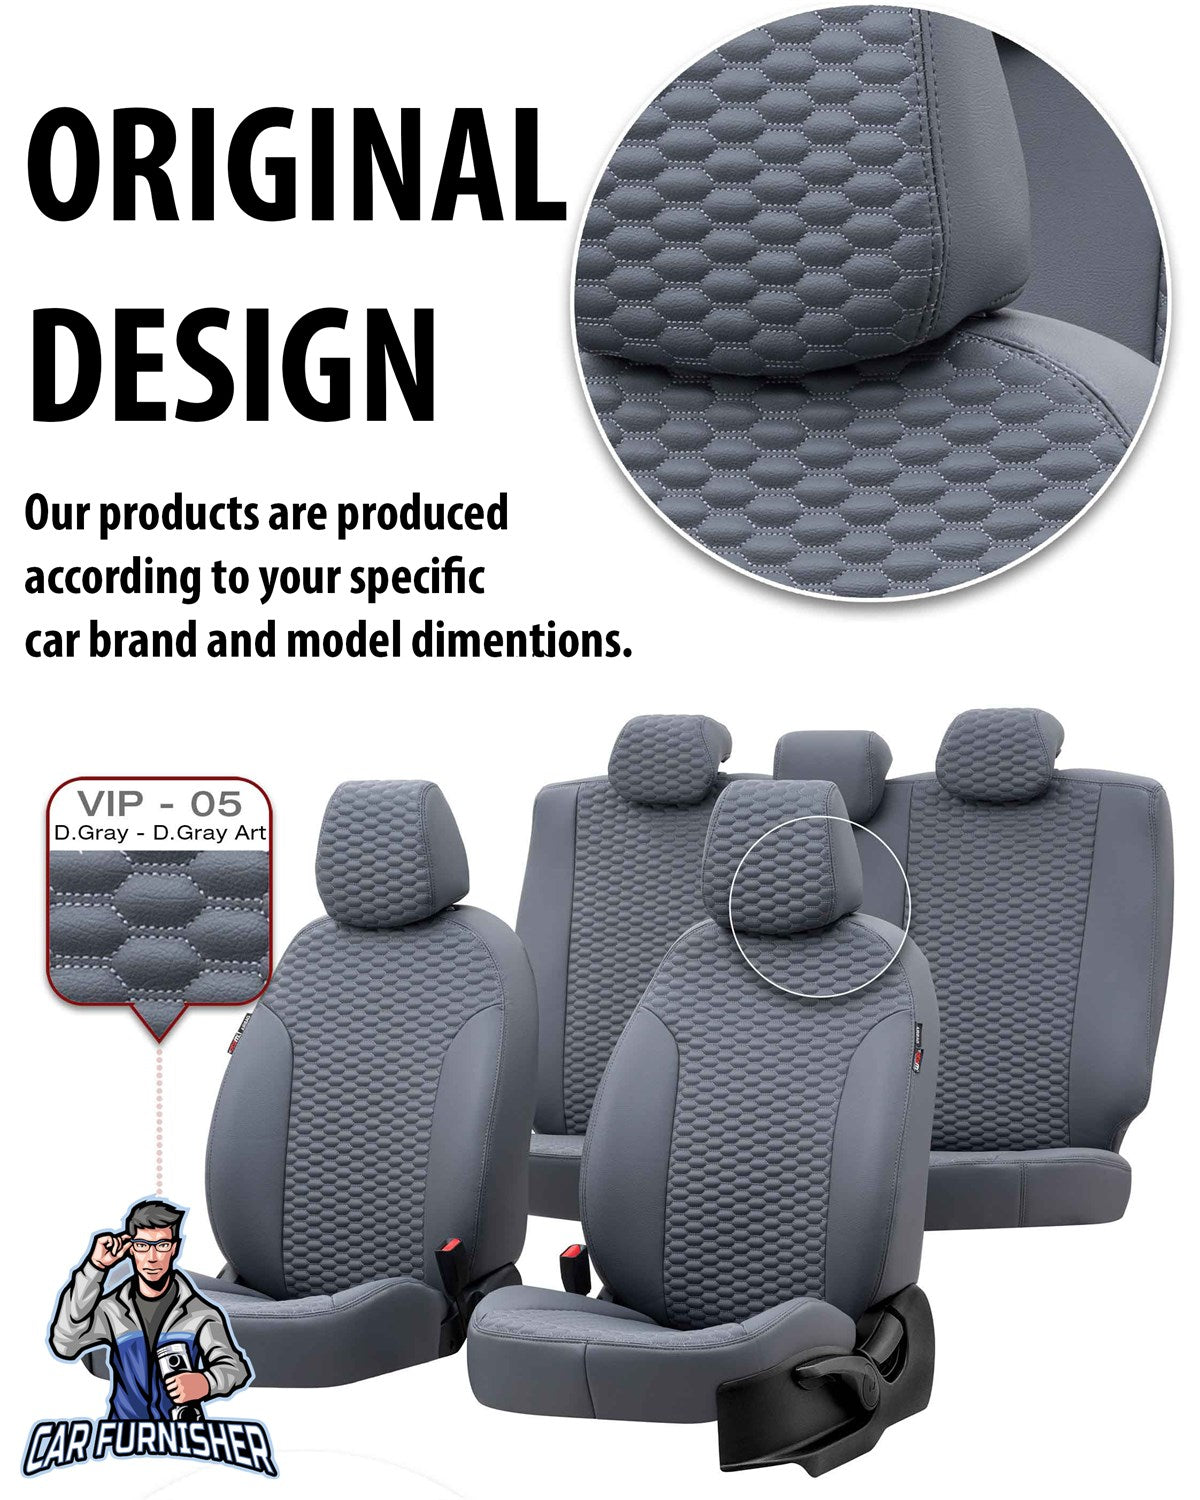 Seat Ateca Seat Covers Tokyo Leather Design Smoked Leather